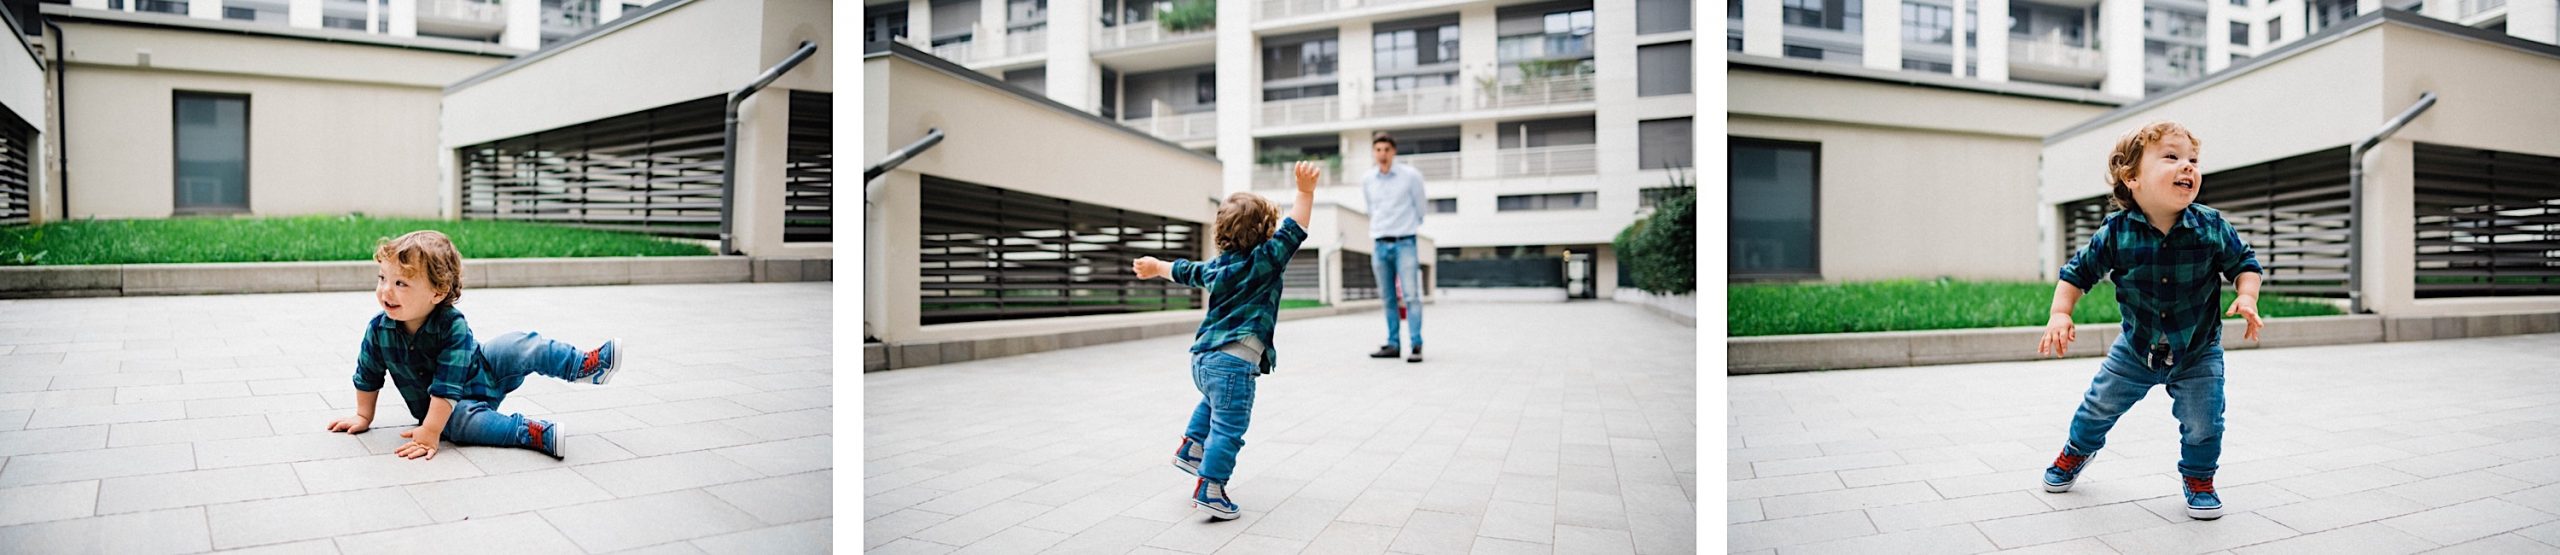 Three Fun Milan Family Portraits of a boy running towards and away from his Dad in their building's courtyard.